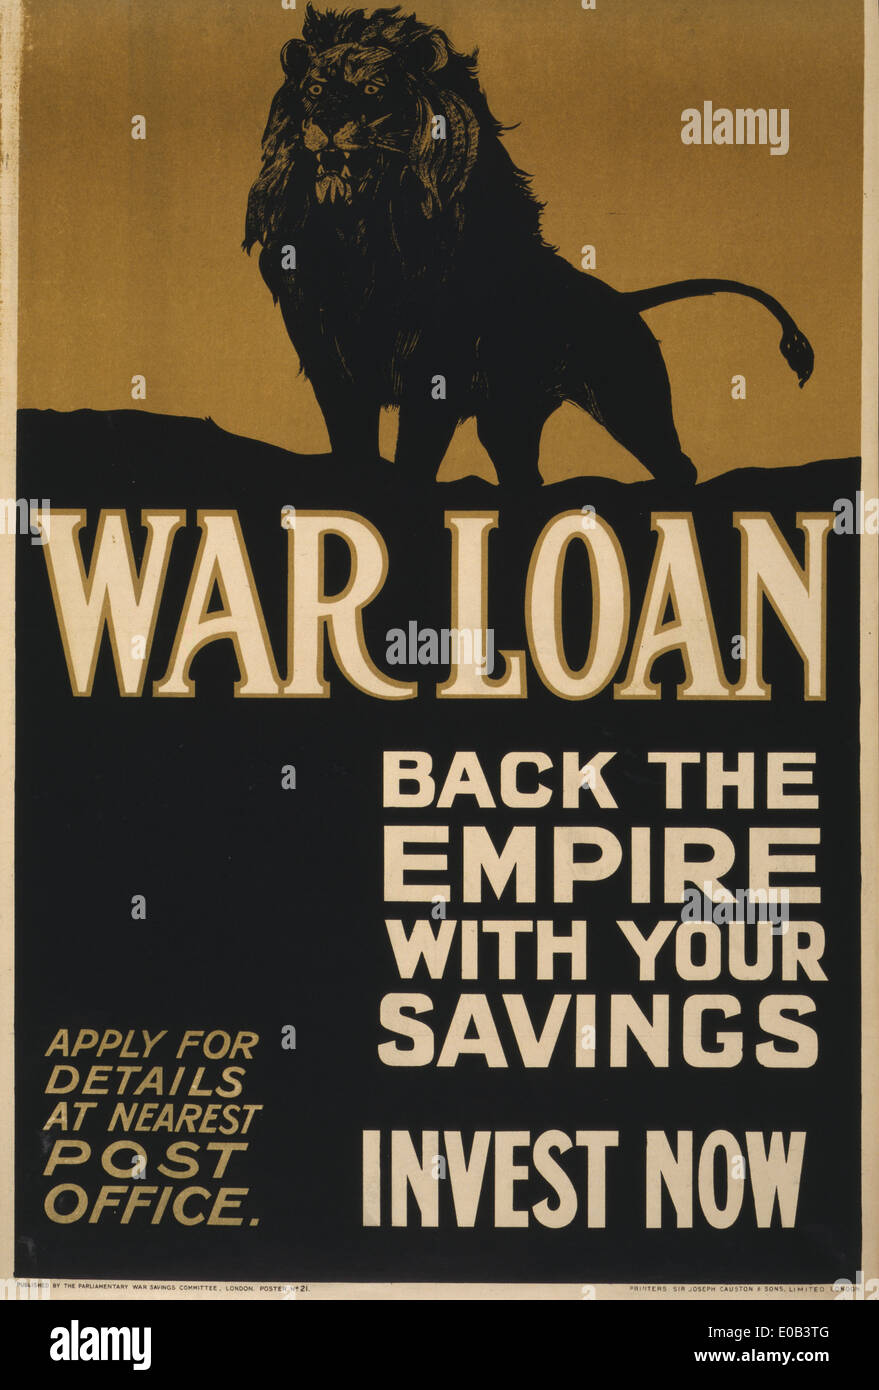 War loan. Back the empire with your savings. Invest now - 1915 Stock Photo